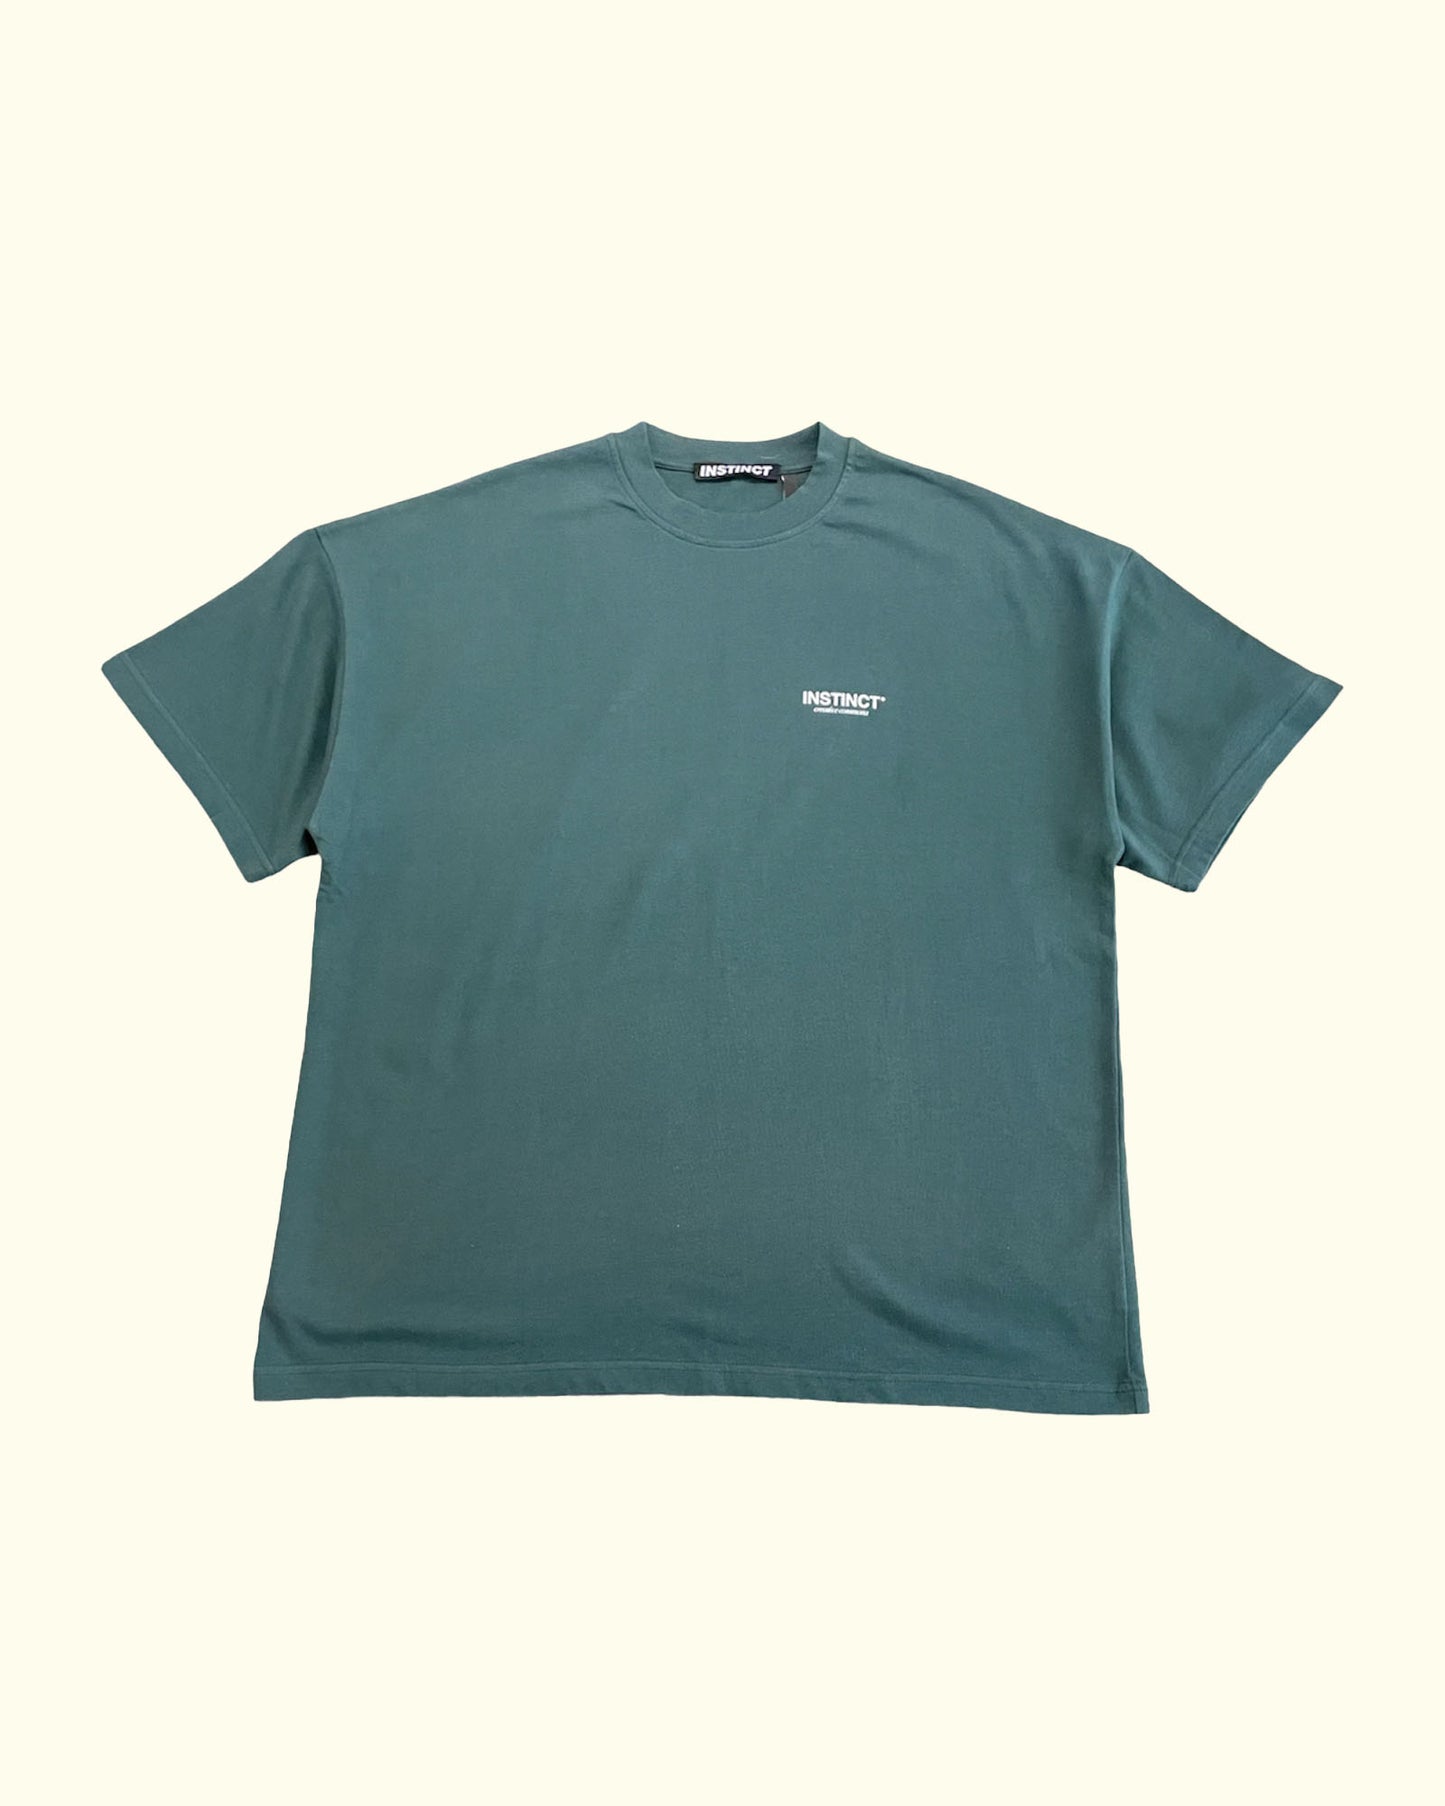 'The Painter' Green Tee